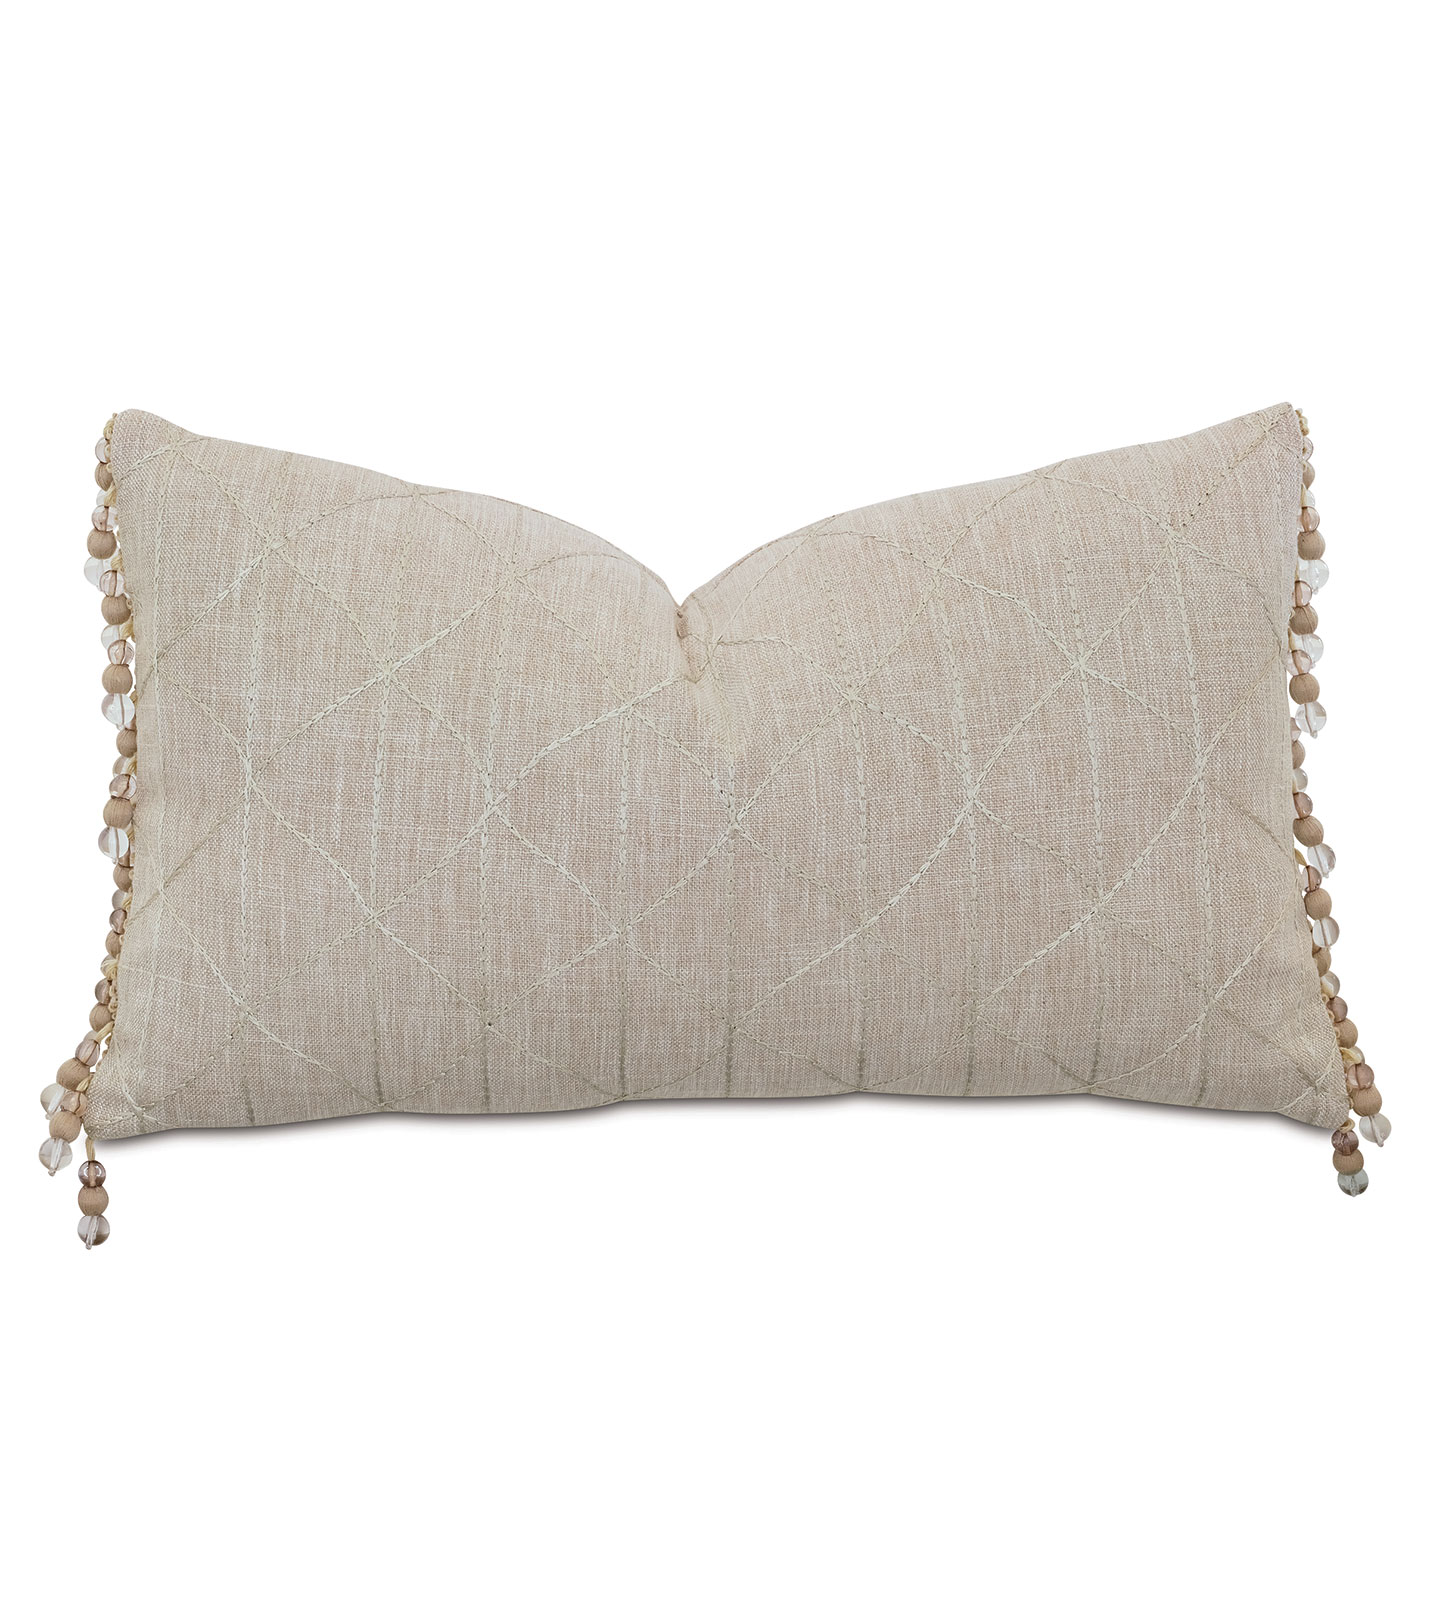 Evie Embroidered Decorative Pillow - Eastern Accents